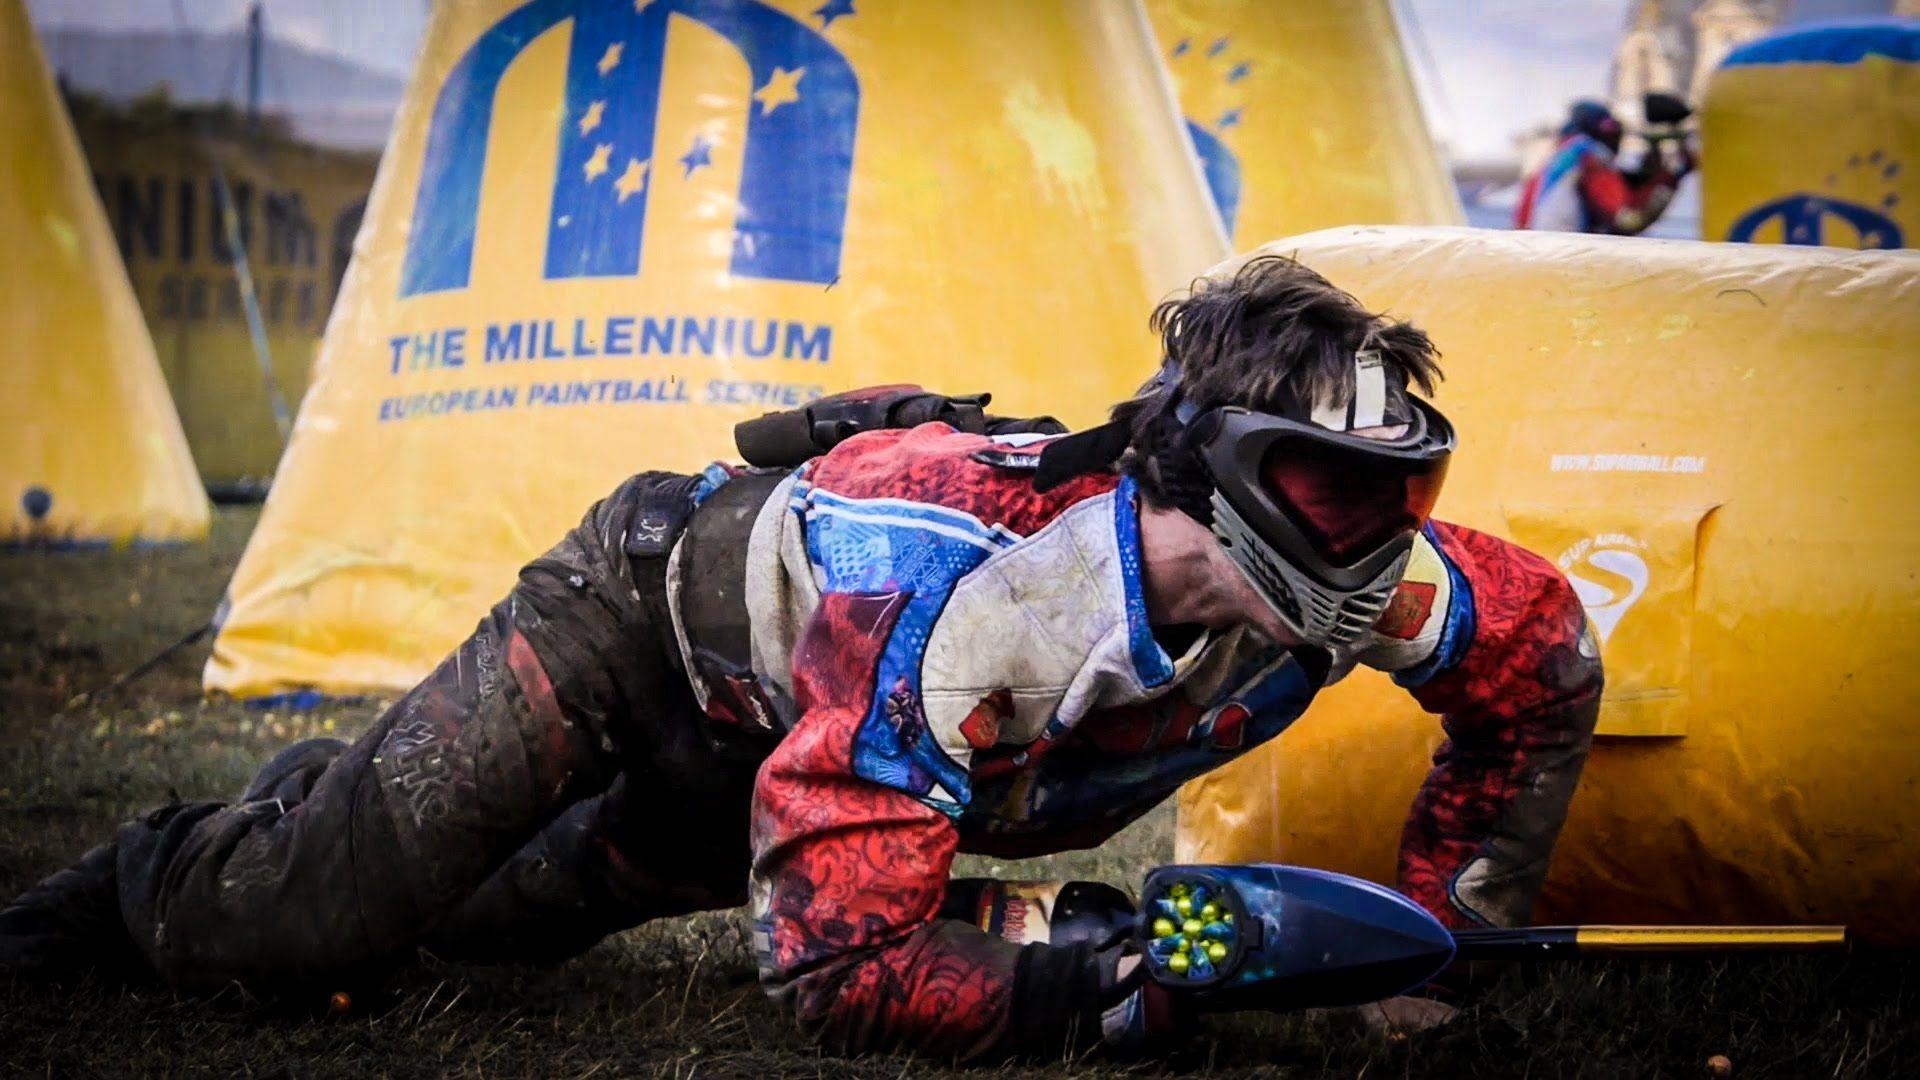 Paintball: The Millennium European Paintball Series event, Competitive shooting sports discipline. 1920x1080 Full HD Wallpaper.